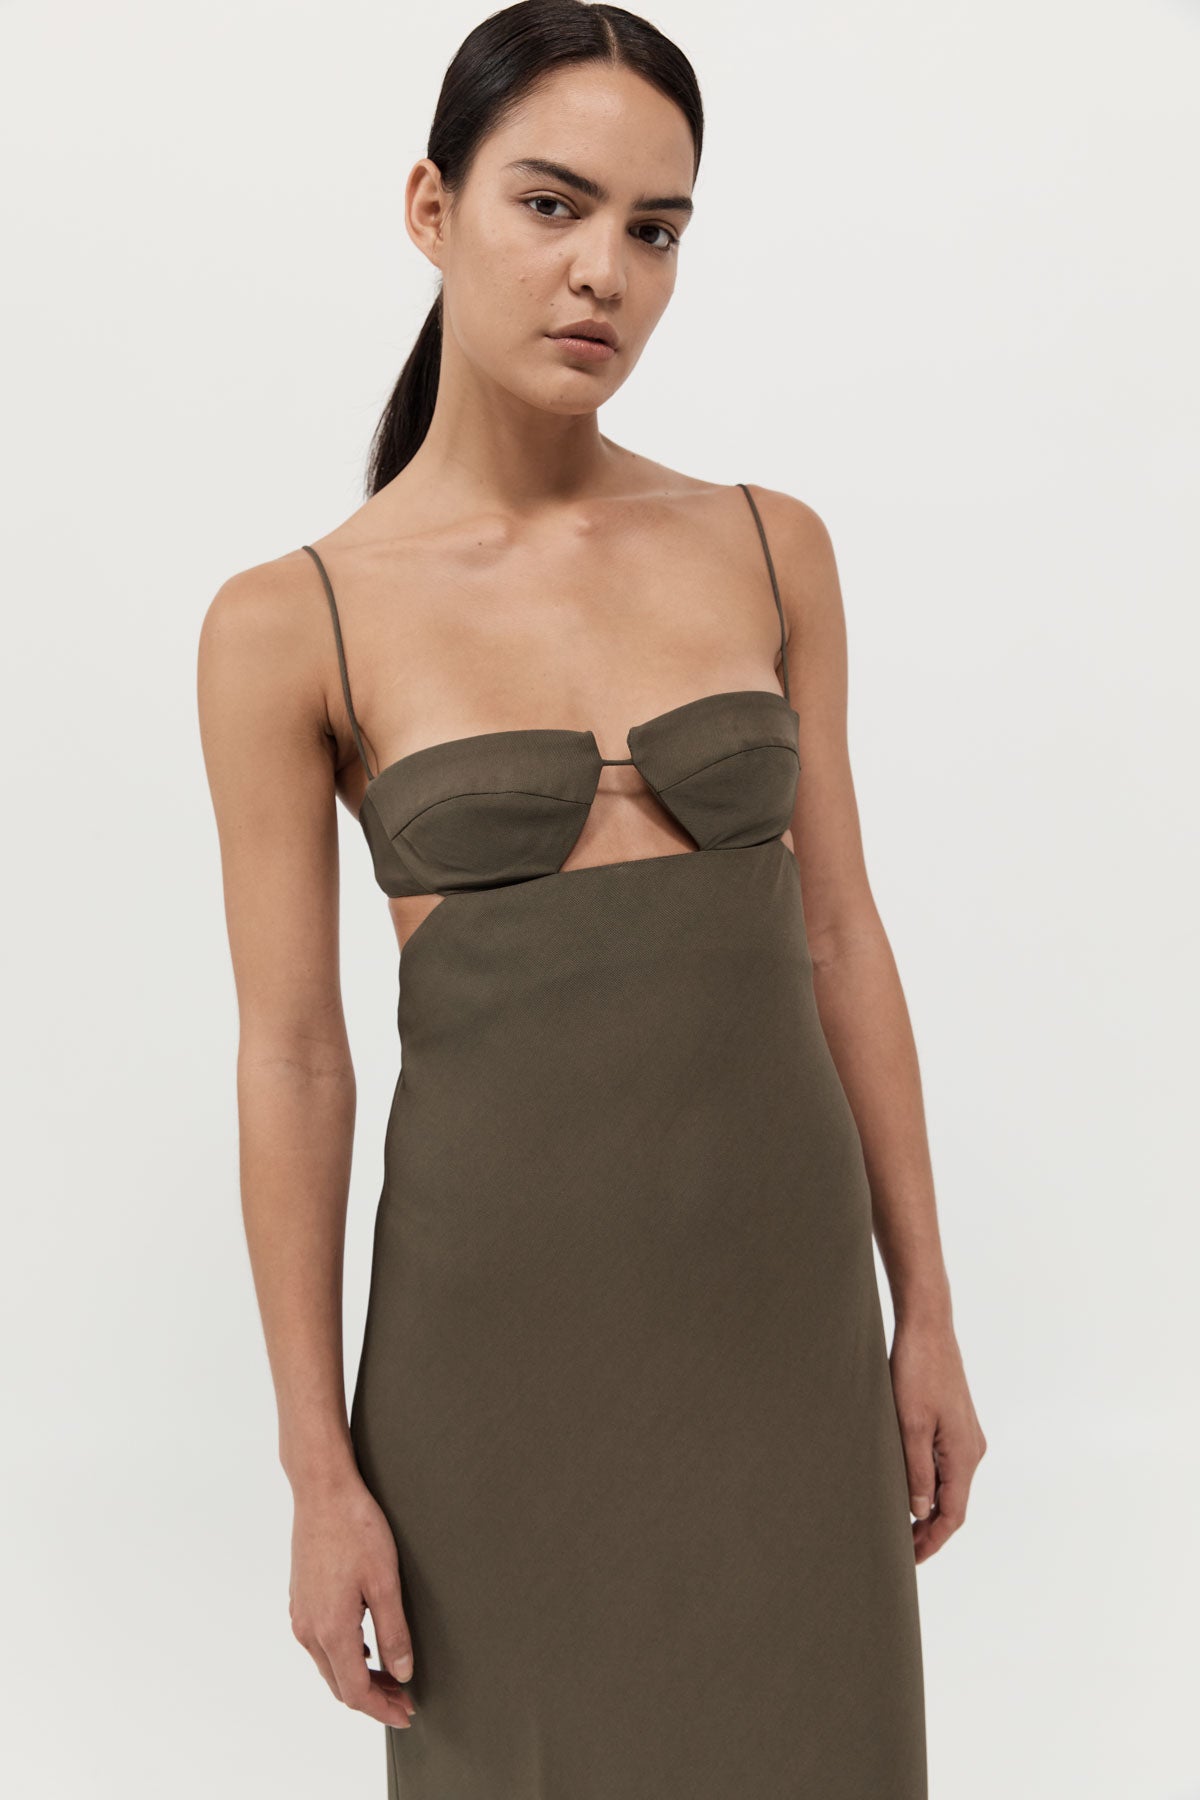 The St Agni Resort Dress in Olivine available at The New Trend Australia